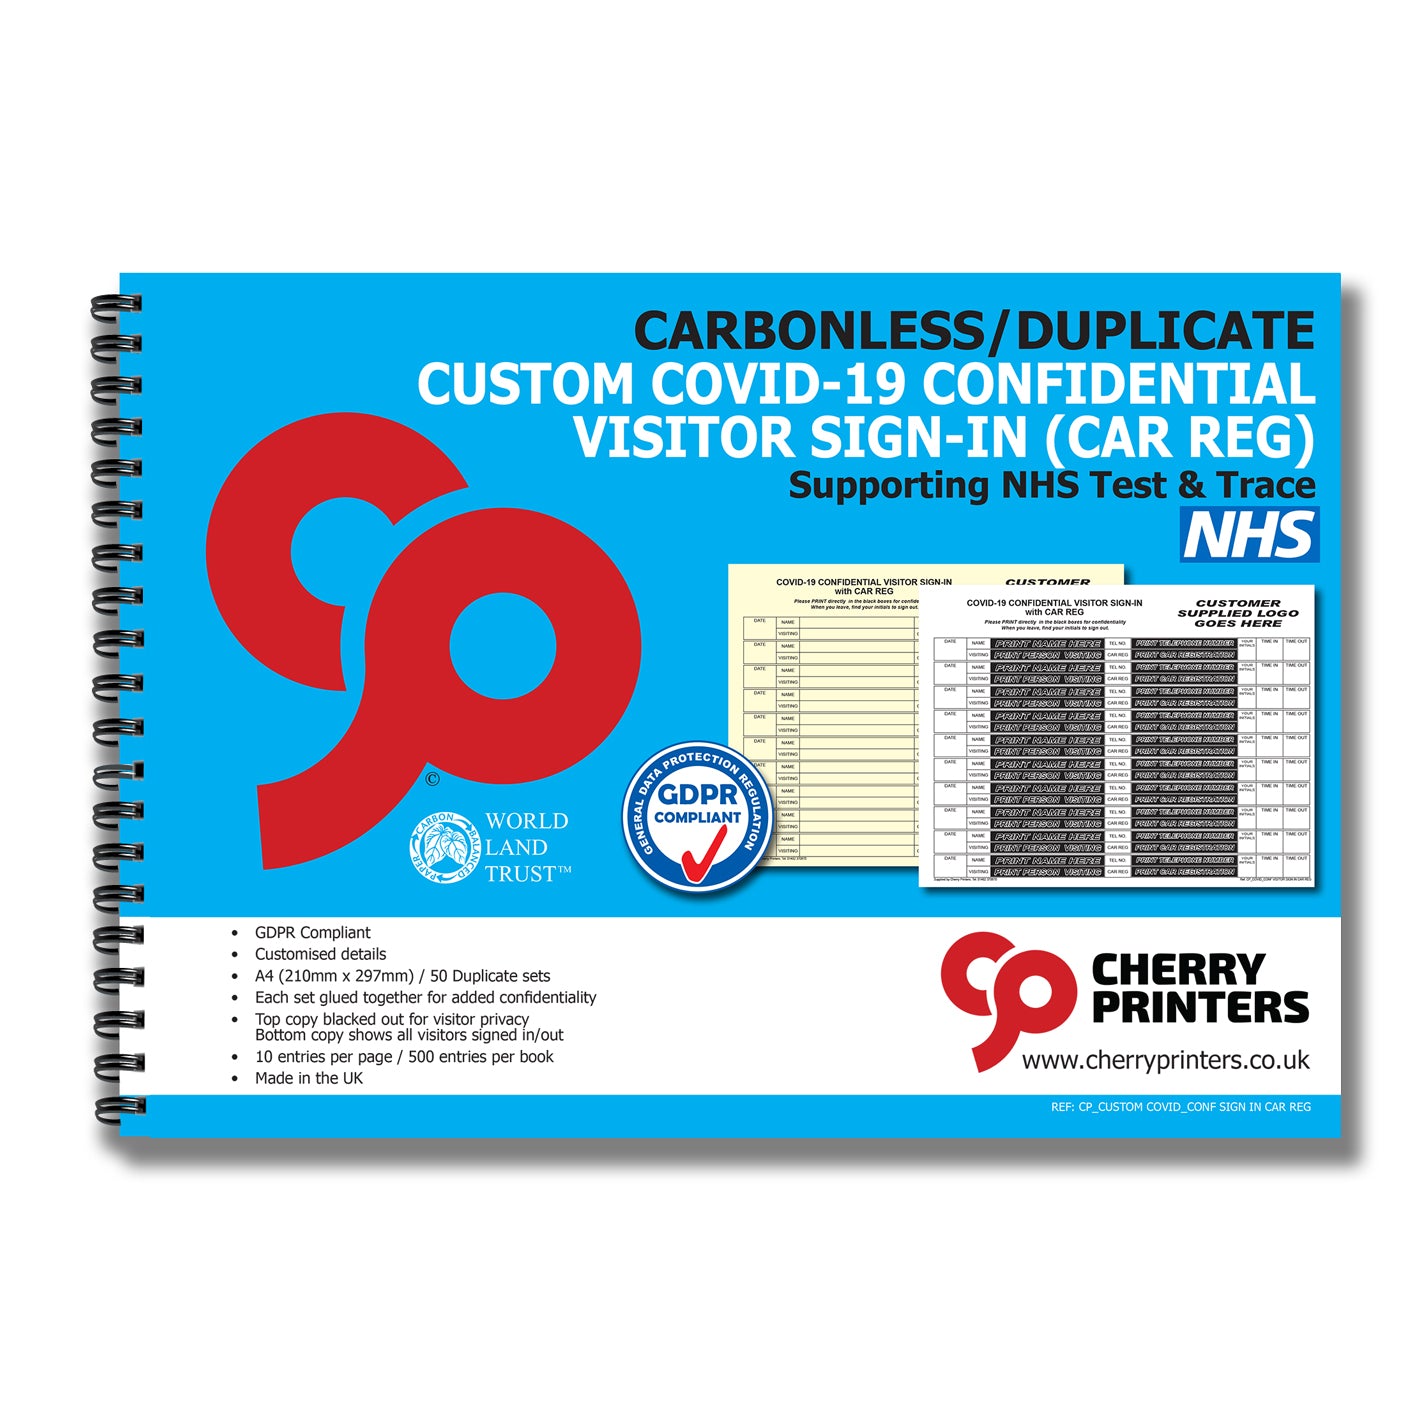 NCR *CUSTOM* Covid Confidential Visitor Sign in with Car Reg Duplicate Wiro Book A4 50 sets GDPR | 2 Book Pack